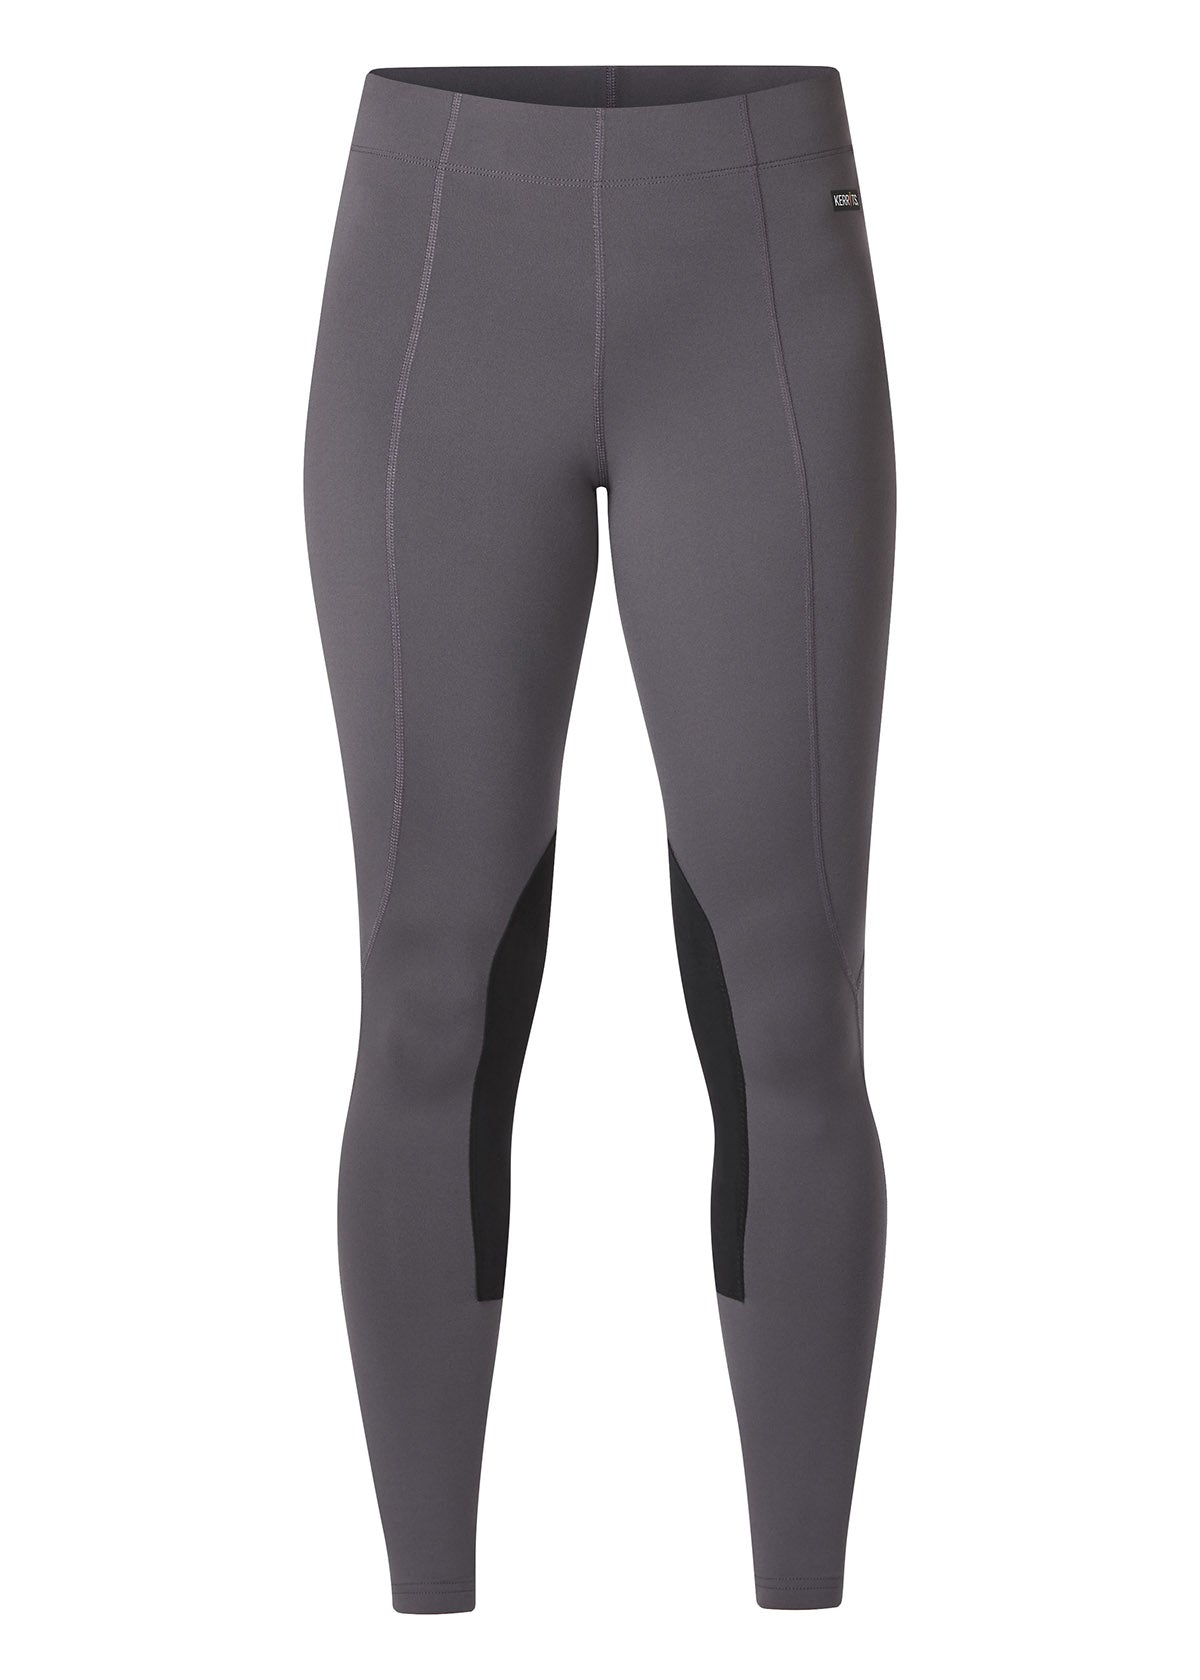 Kerrits Flow Rise Performance Riding Tights